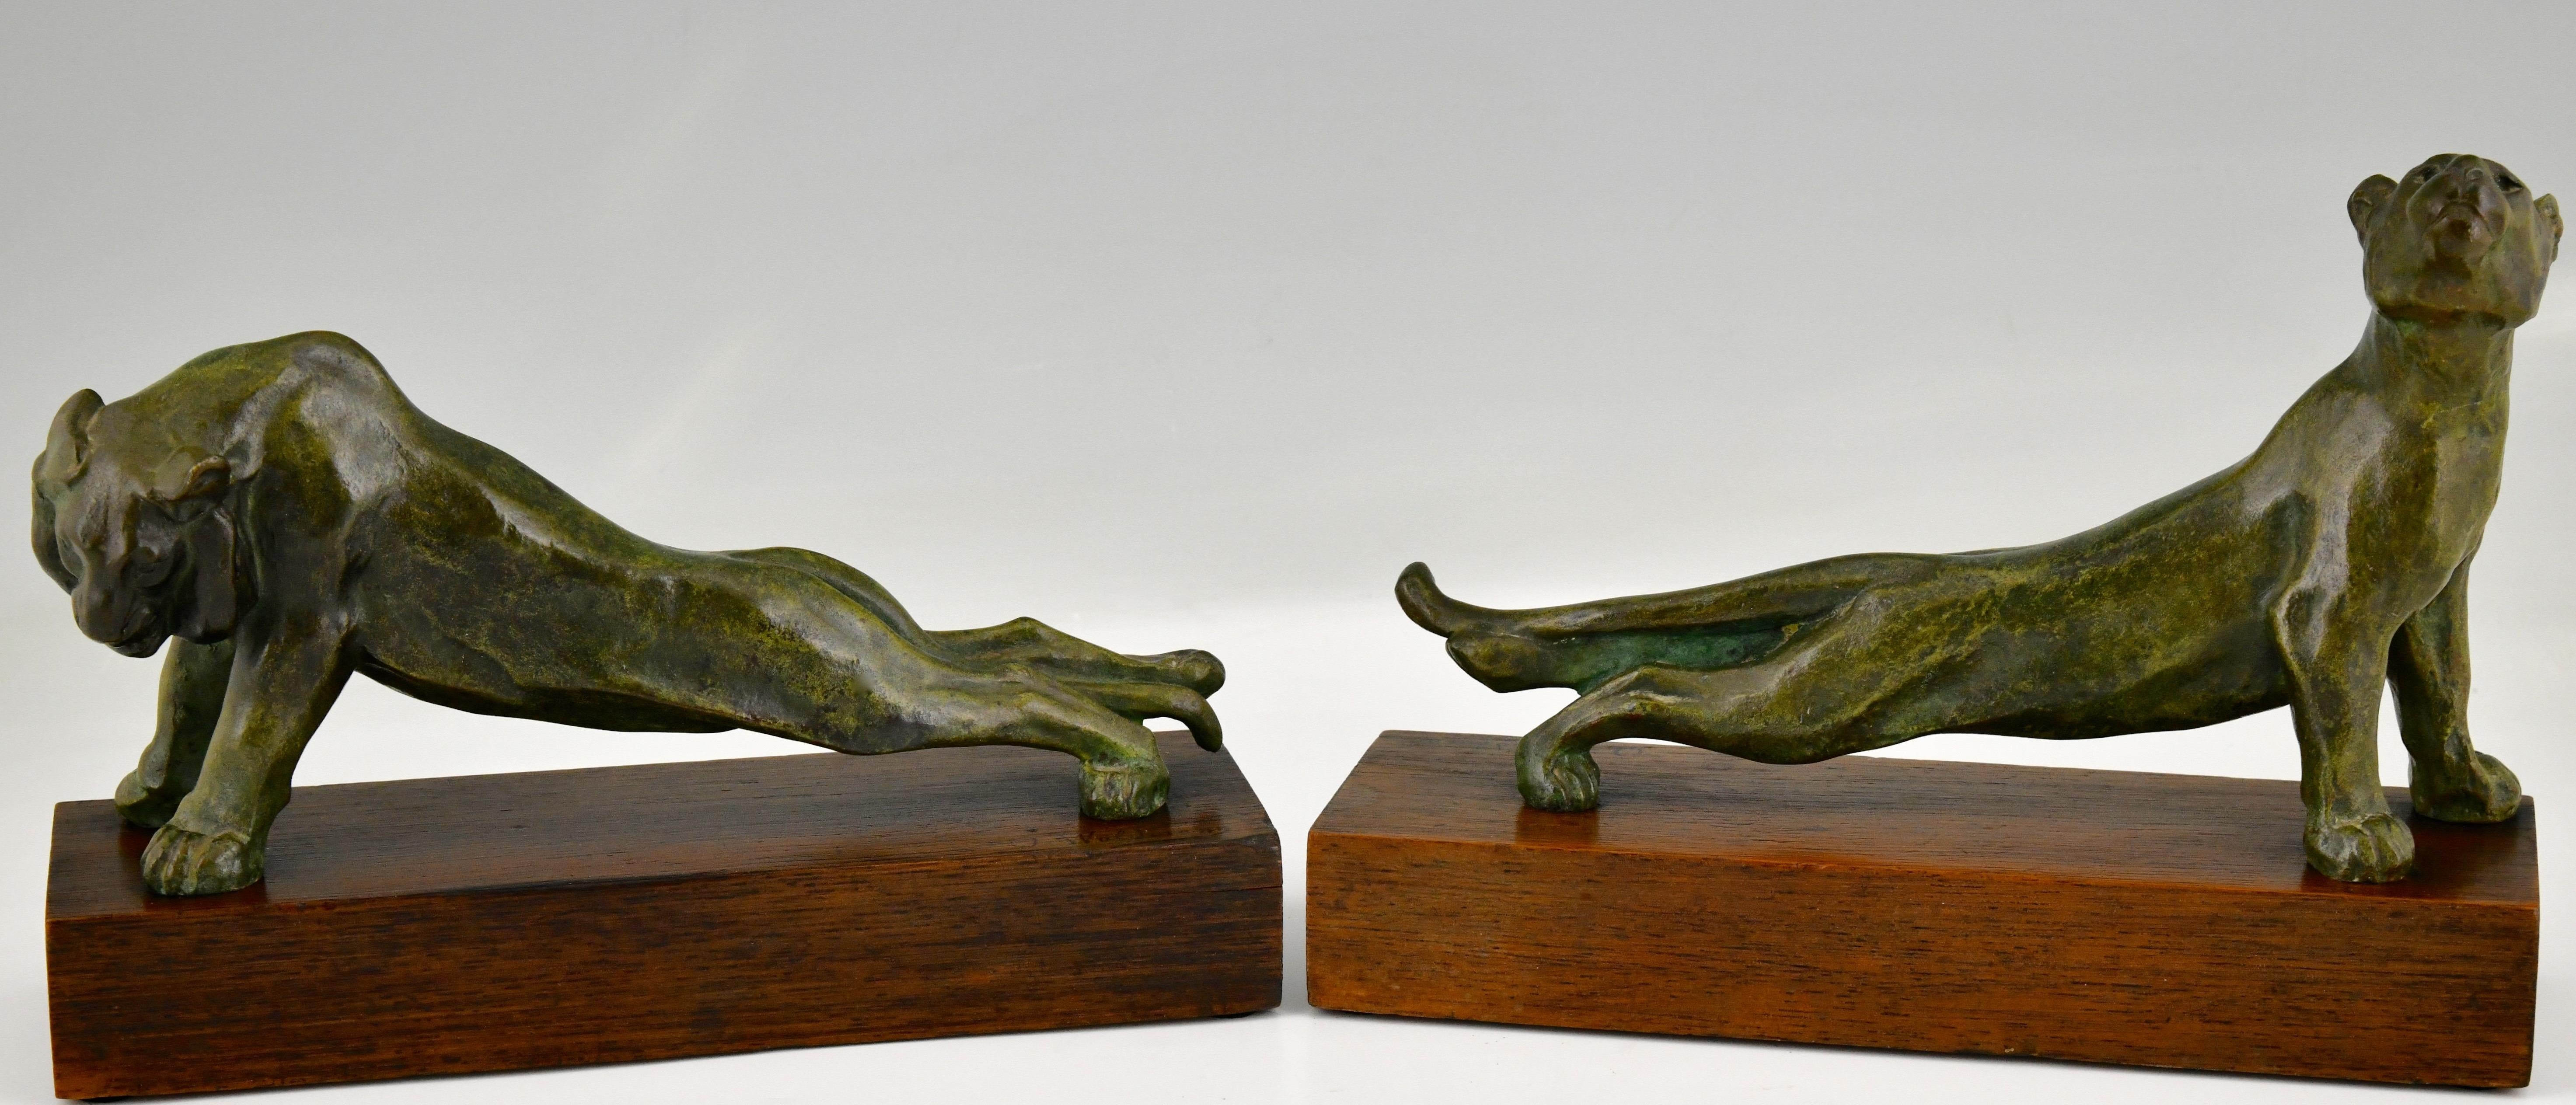 Early 20th Century Art Deco Bronze Bookends Panther and Tiger by Oscar Waldmann, 1925